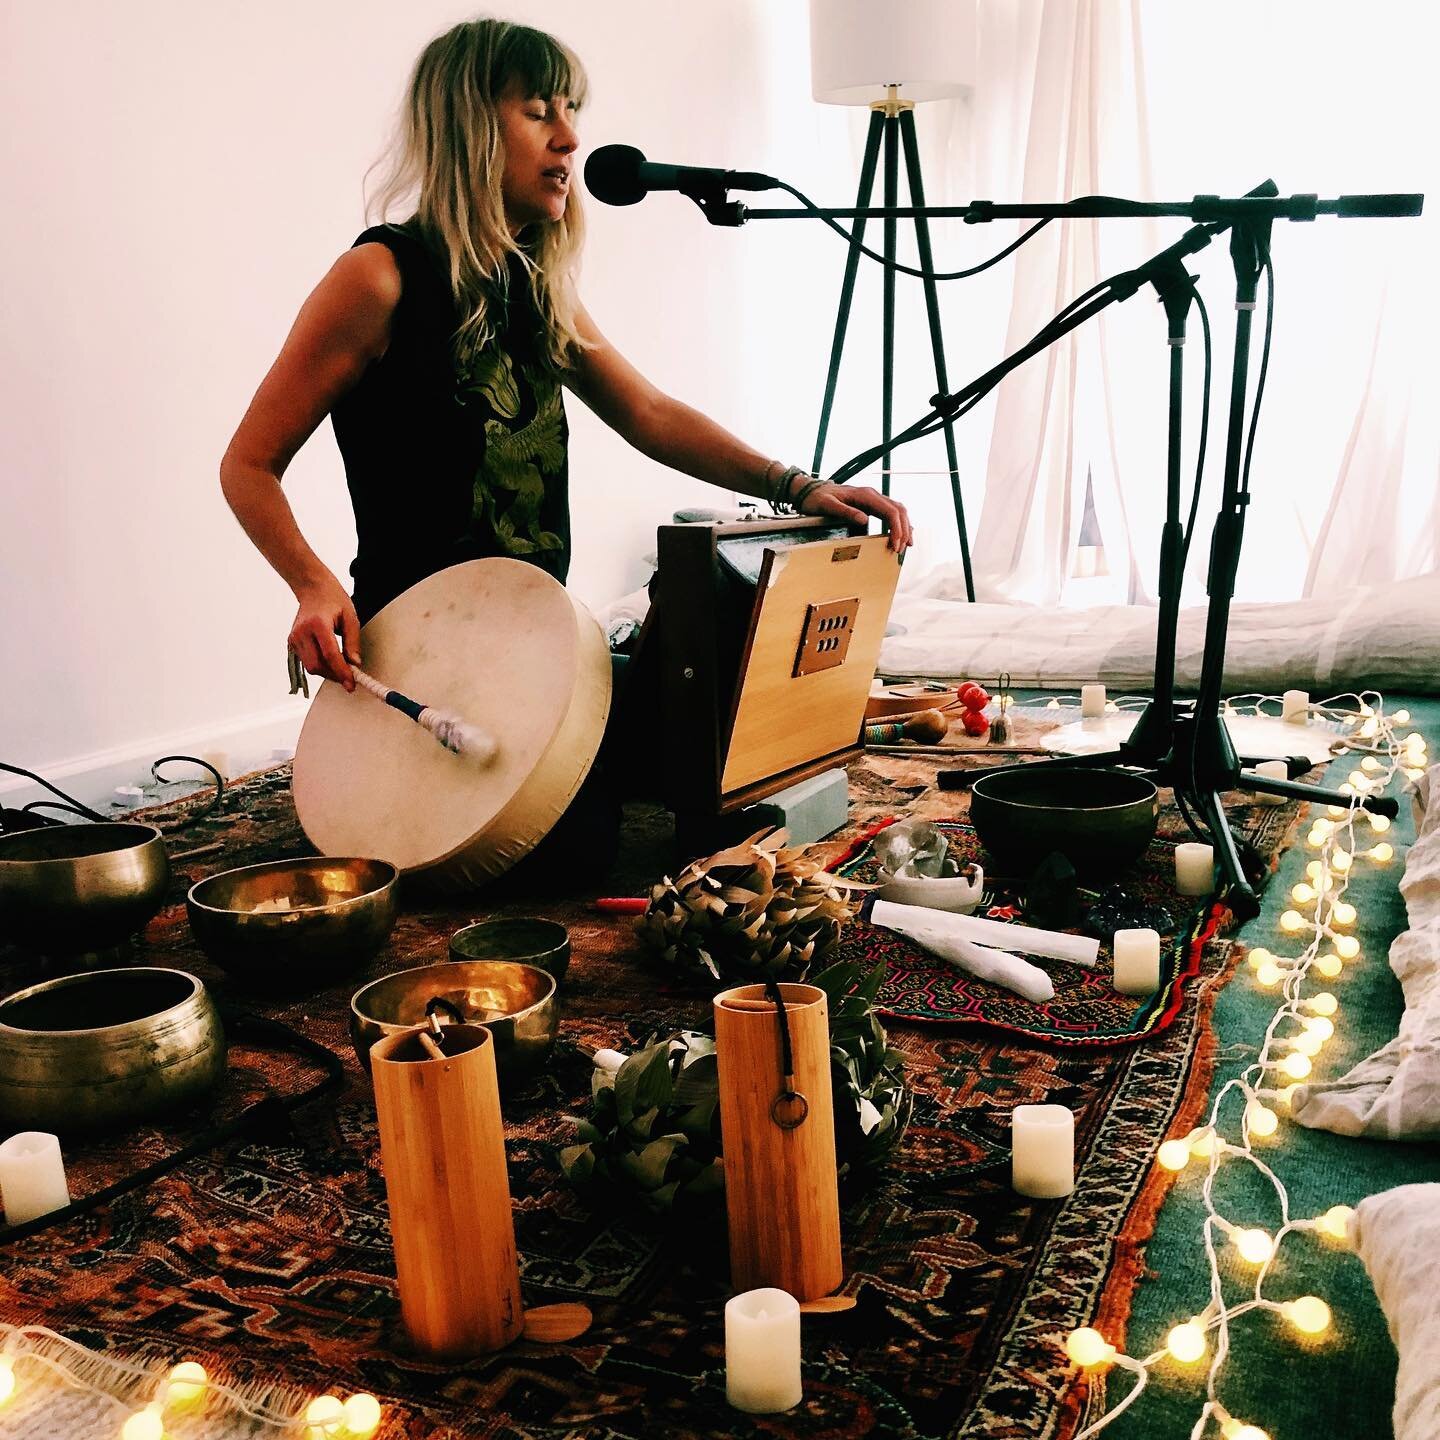 Full Moon reset! 🌕🎶🪶

Join me for a lunar Sound Healing Experience with Singing Bowls on the Body this SAT, Aug 13th.
✨
Our intimate evening will offer a more personalized ceremonial sound journey within a semi-private small group. 
✨
Weaving inte